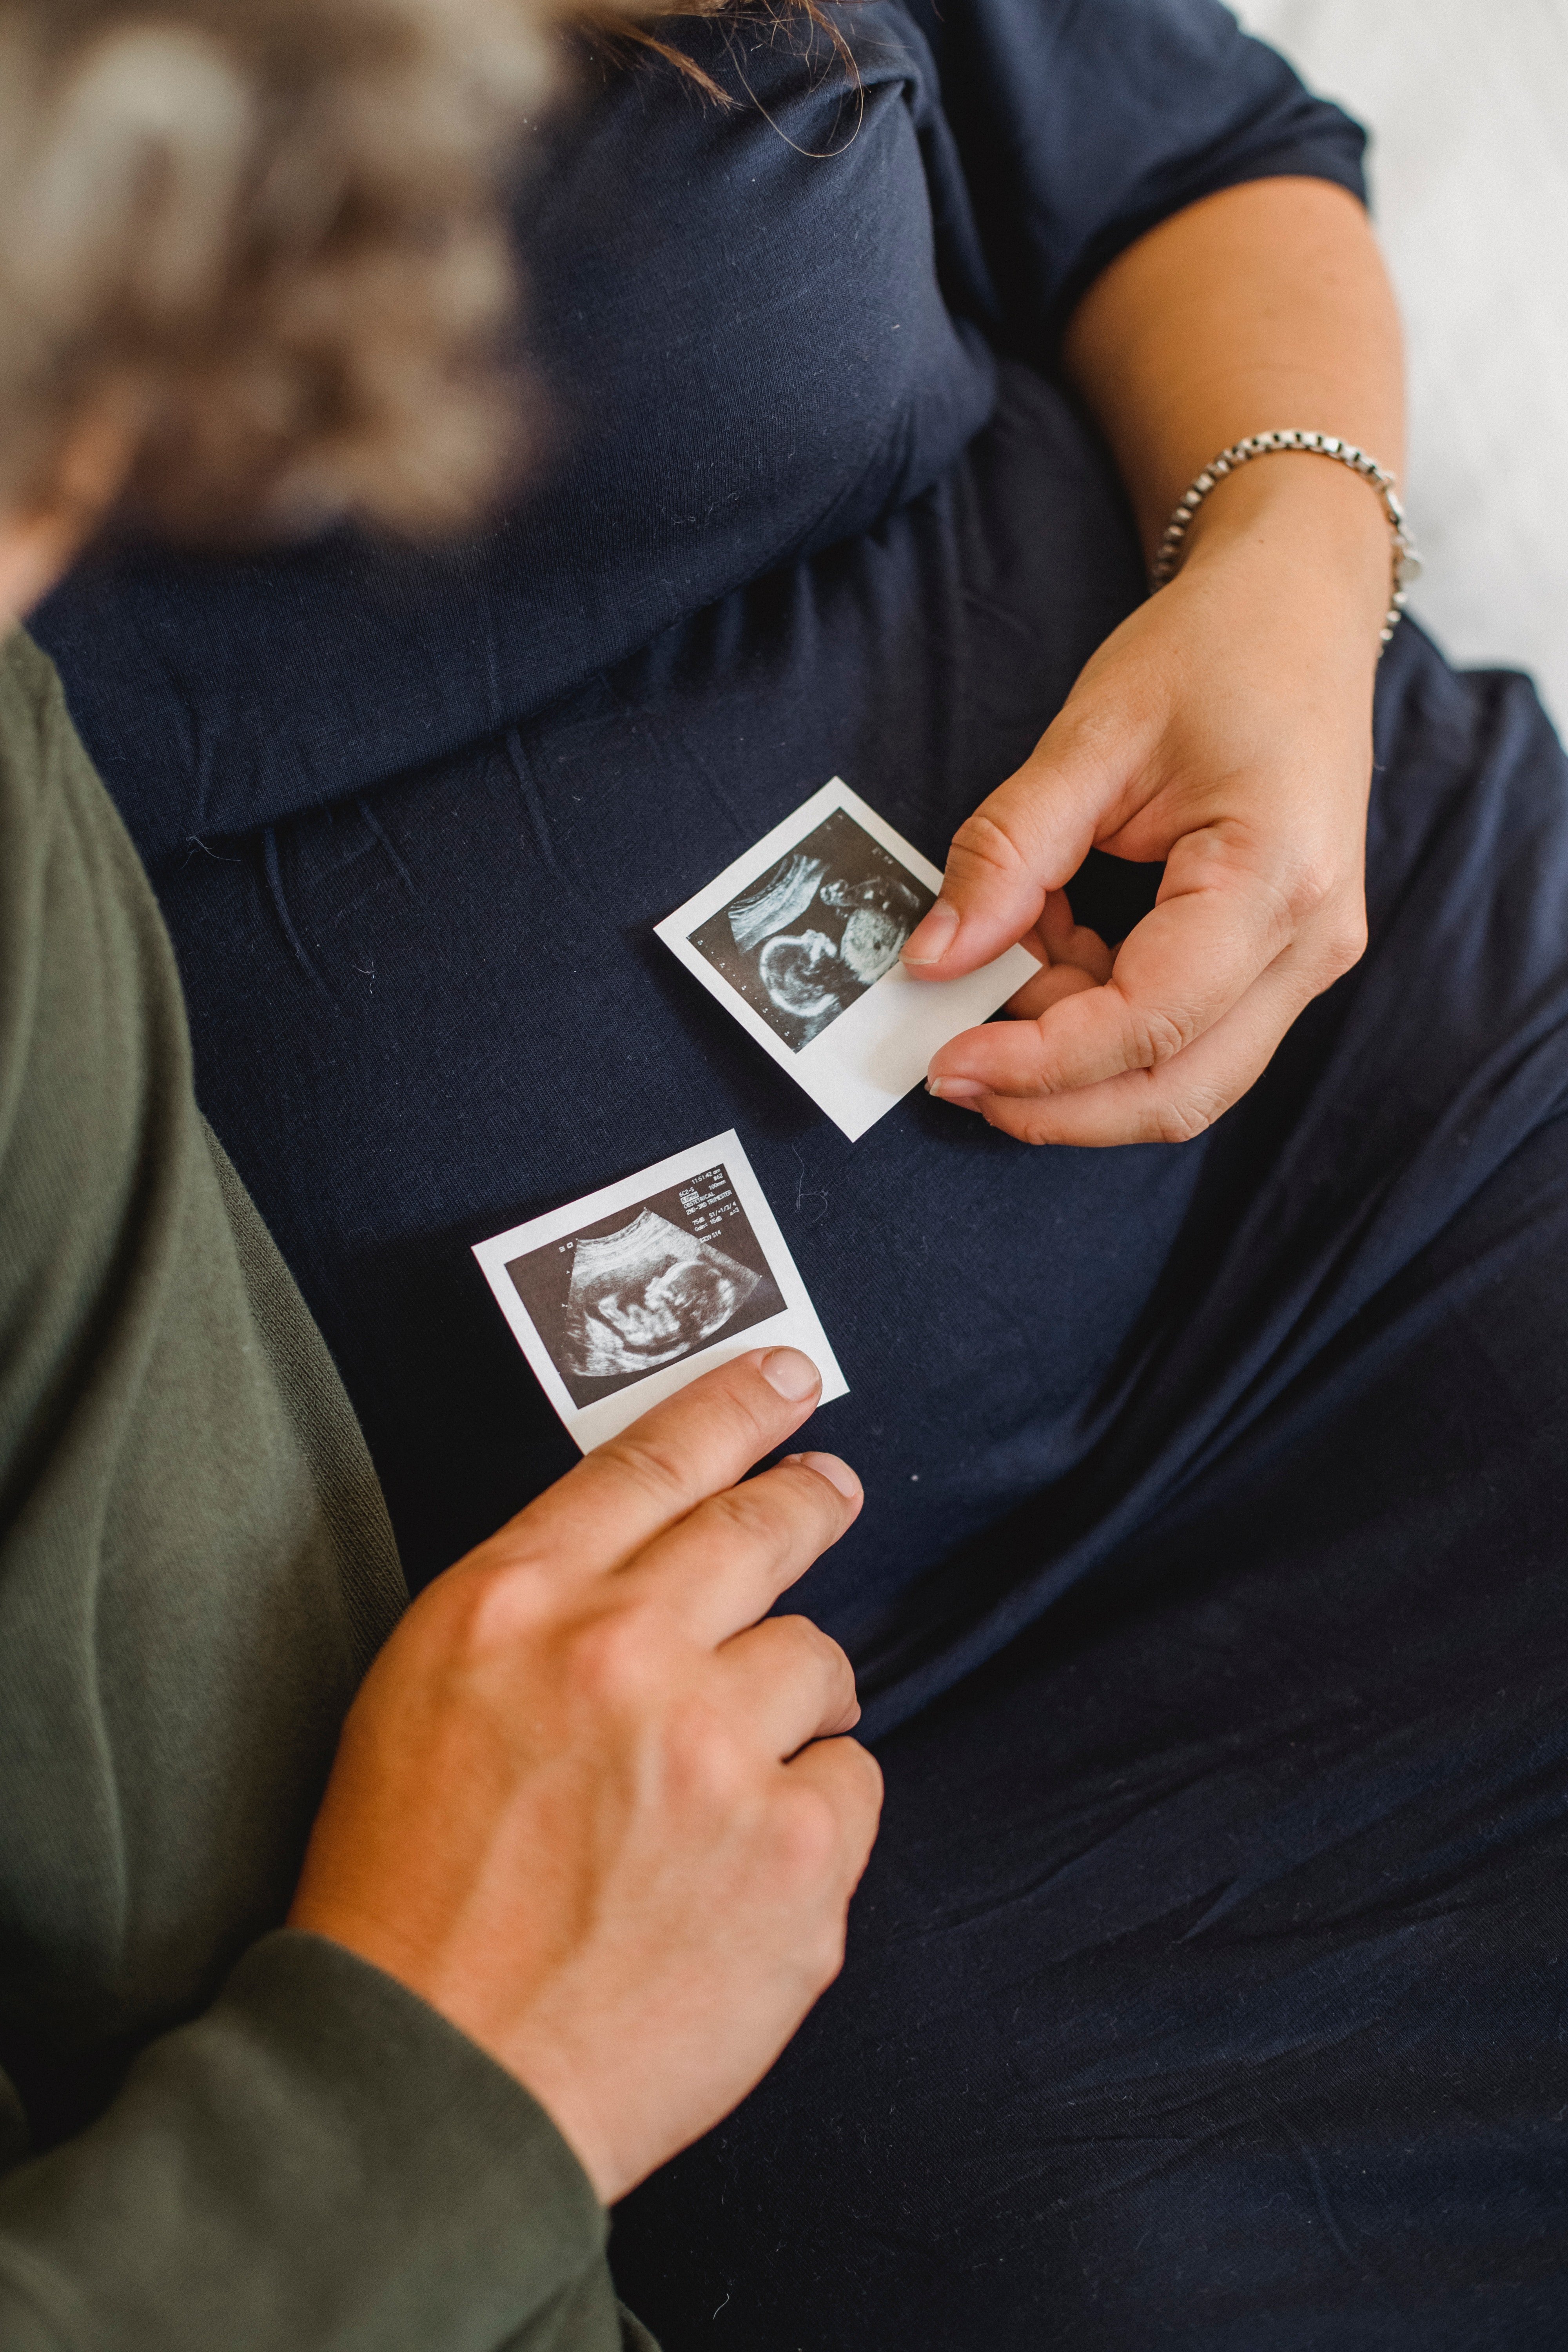 Pictured - An image of an expecting couple holding sonogram images close to the pregnant tummy | Source: Pexels 